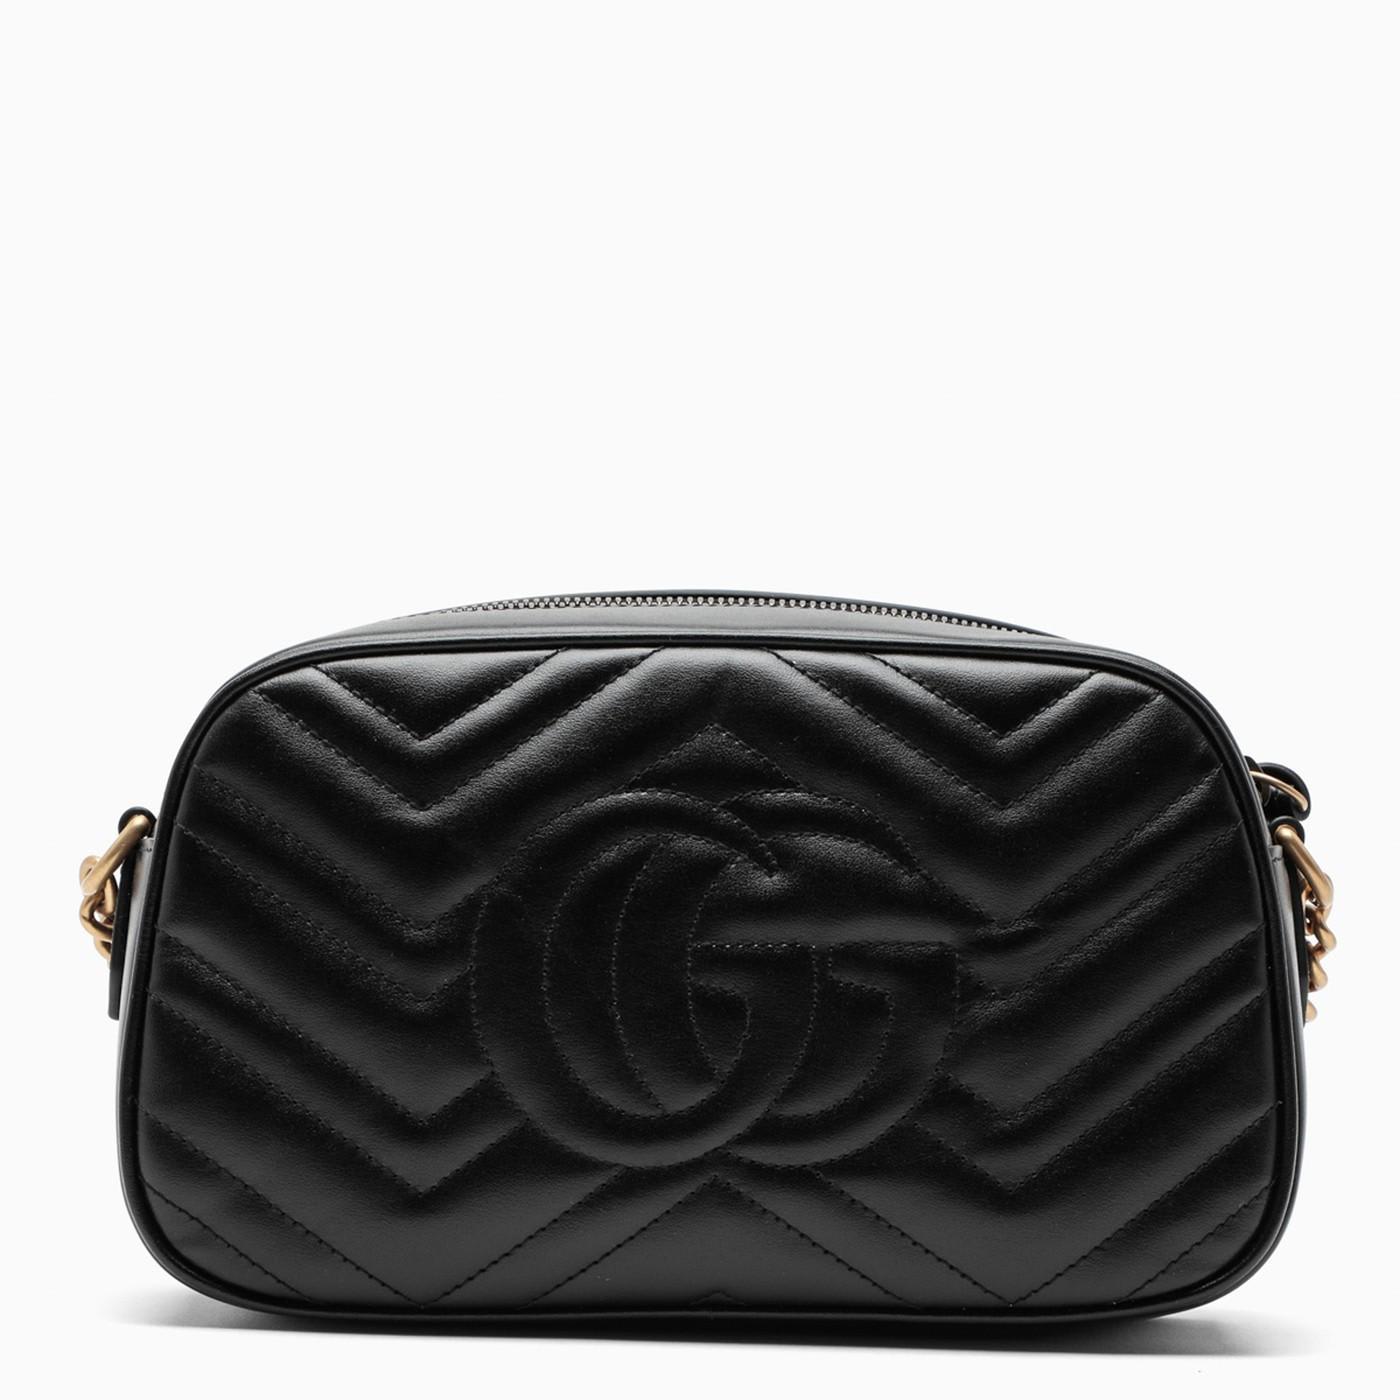 GUCCI GG marmont small matelassé shoulder bag in White Leather